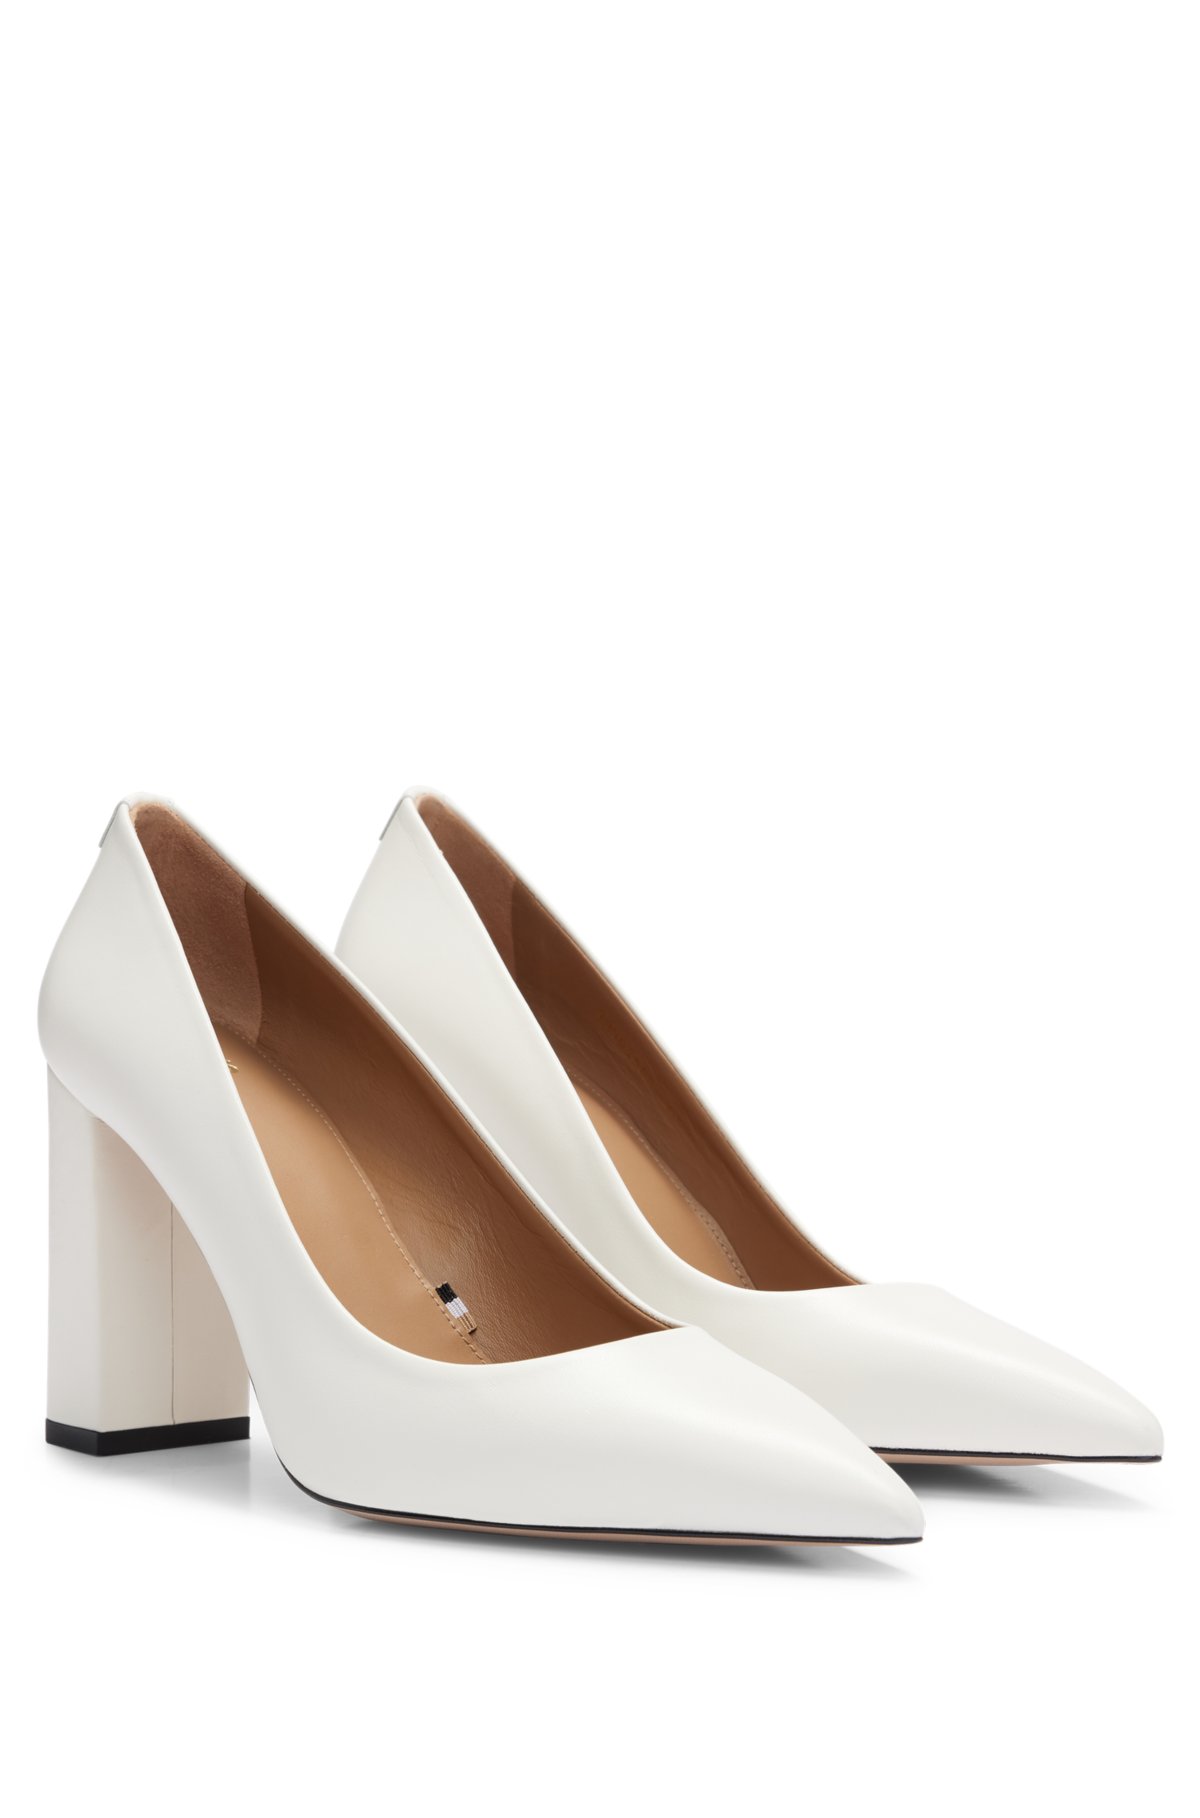 BOSS - Leather pumps with 9cm block heel